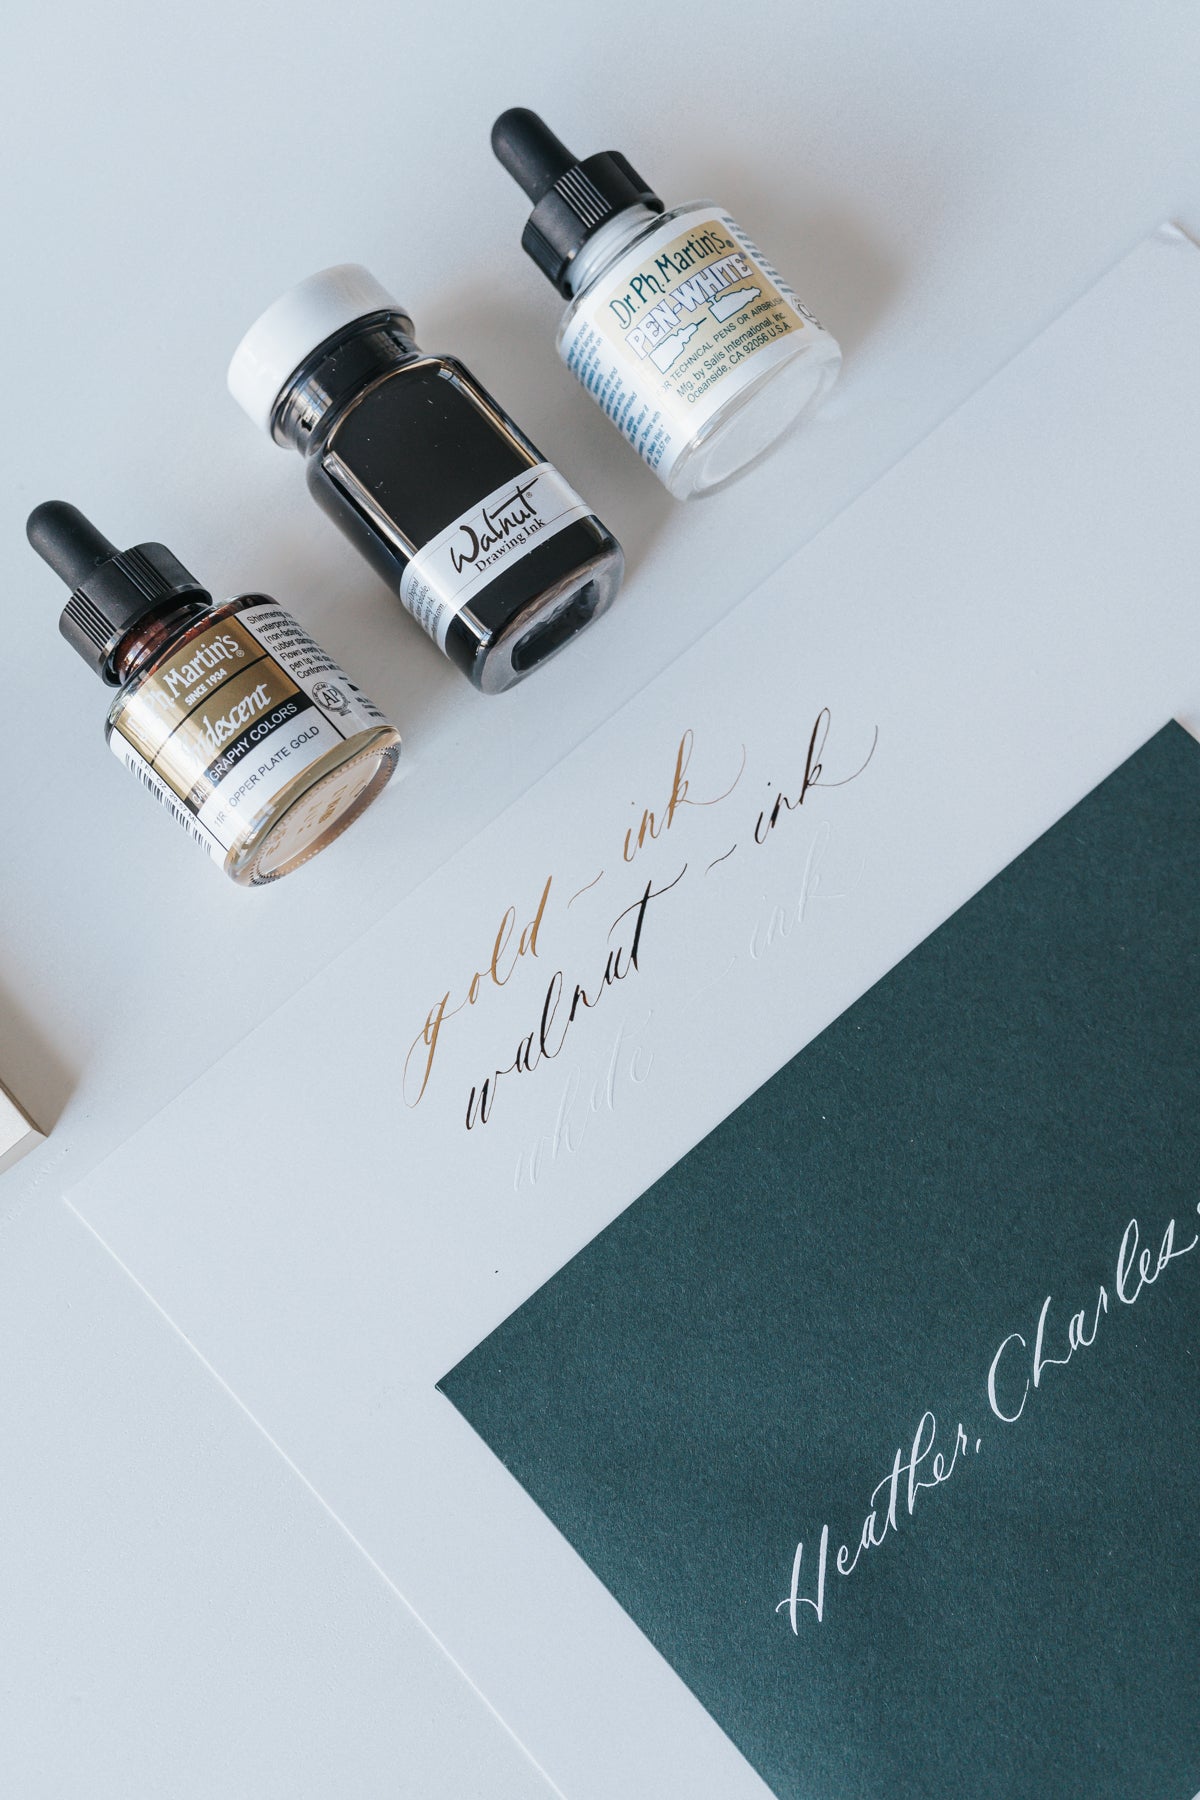 Gold Calligraphy Ink